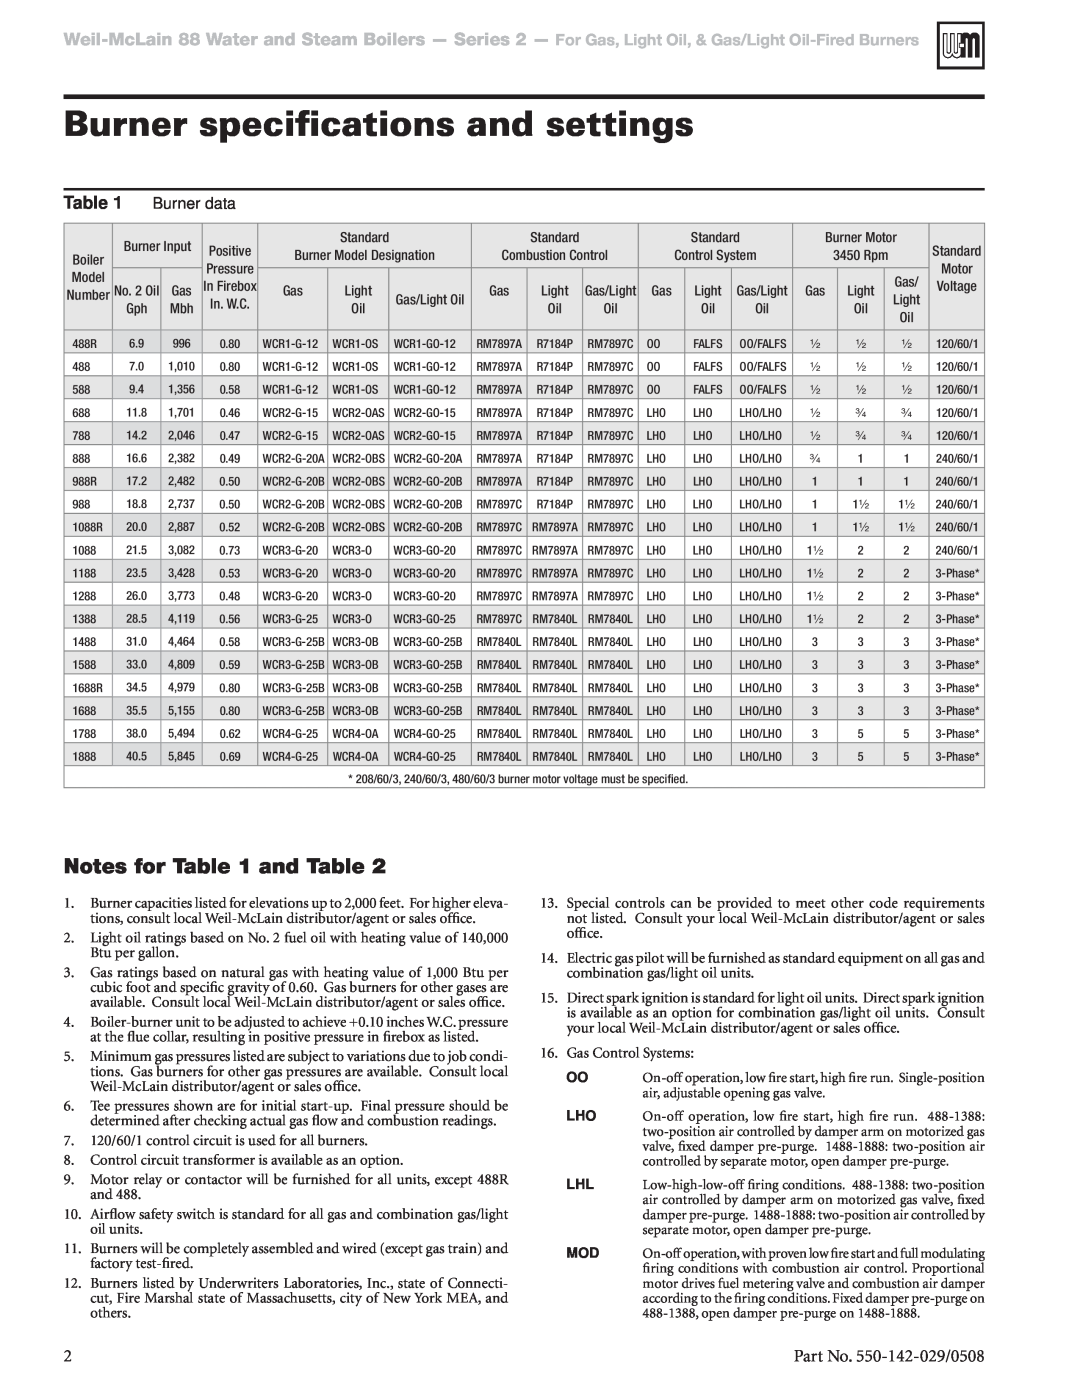 Weil-McLain Gas Burner Burner specifications and settings, Notes for and Table, Burner data, Part No. 550-142-029/0508 